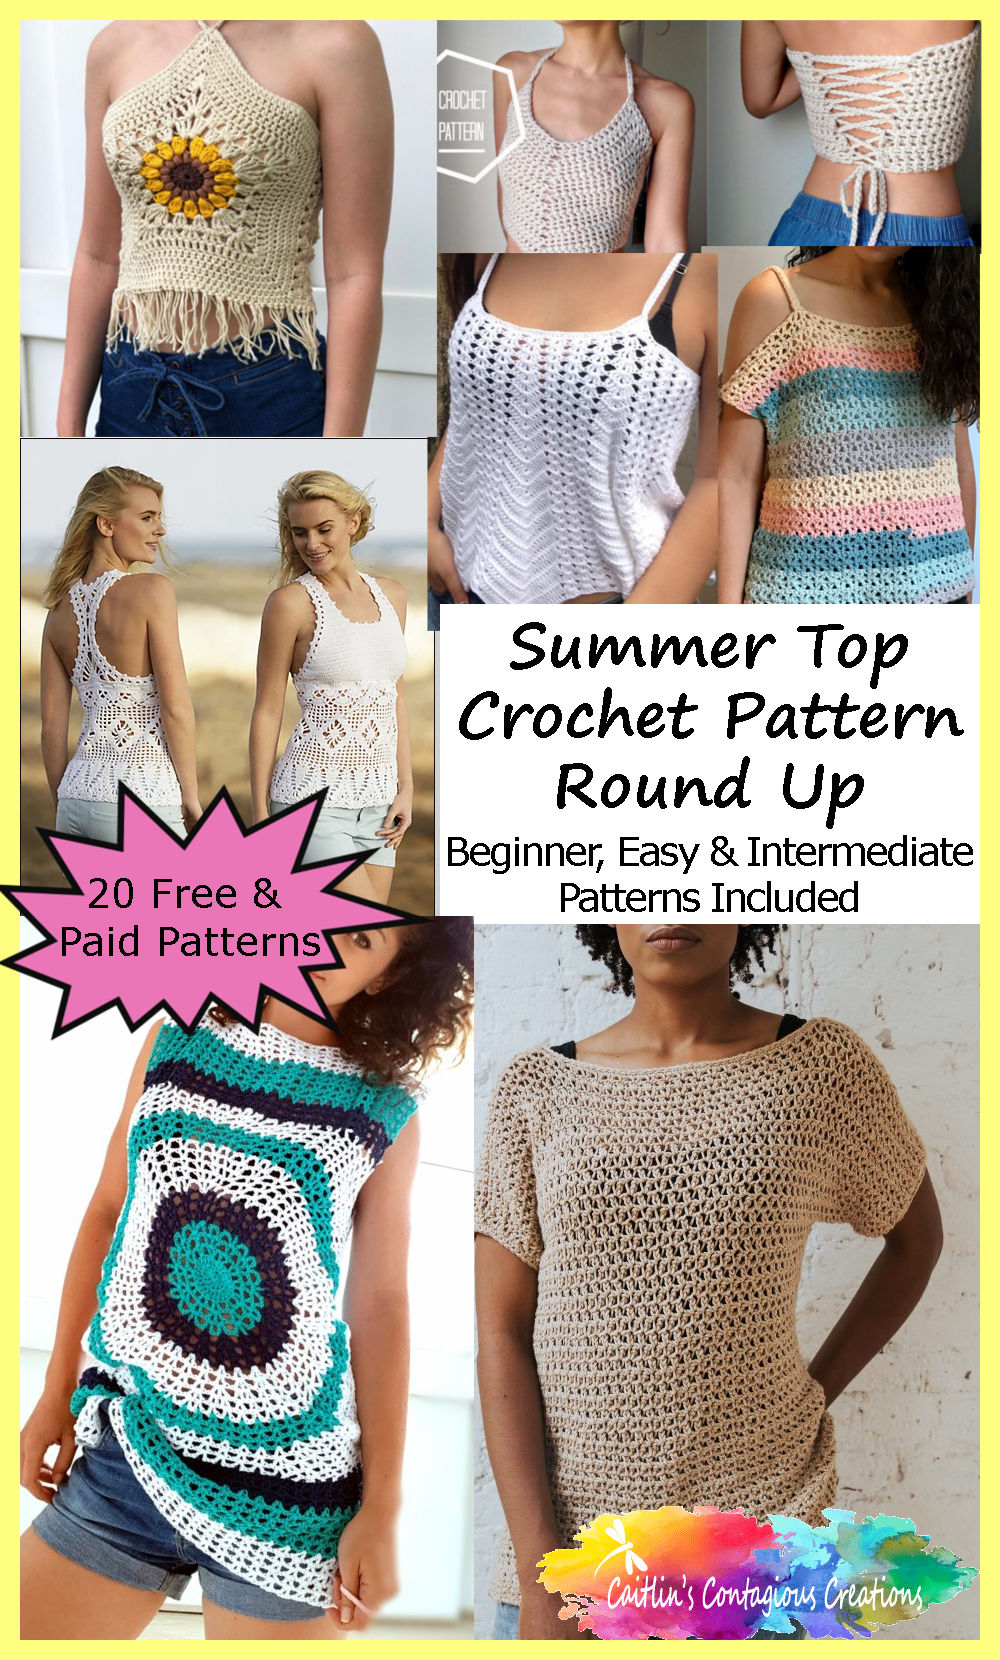 Summer Top Crochet Pattern Round Up from Caitlin's Contagious Creations is a collection of free and paid designs for beginner, easy, and intermediate shirt patterns. Patterns include boho inspired, classy yet simple, beautiful and elegant summer tees, tanks, beach covers, tunics, and crop tops for women. Pick your new summer top today! #SummerCrochetPattern #TunicCrochetPattern #BohoCrochetPatterns